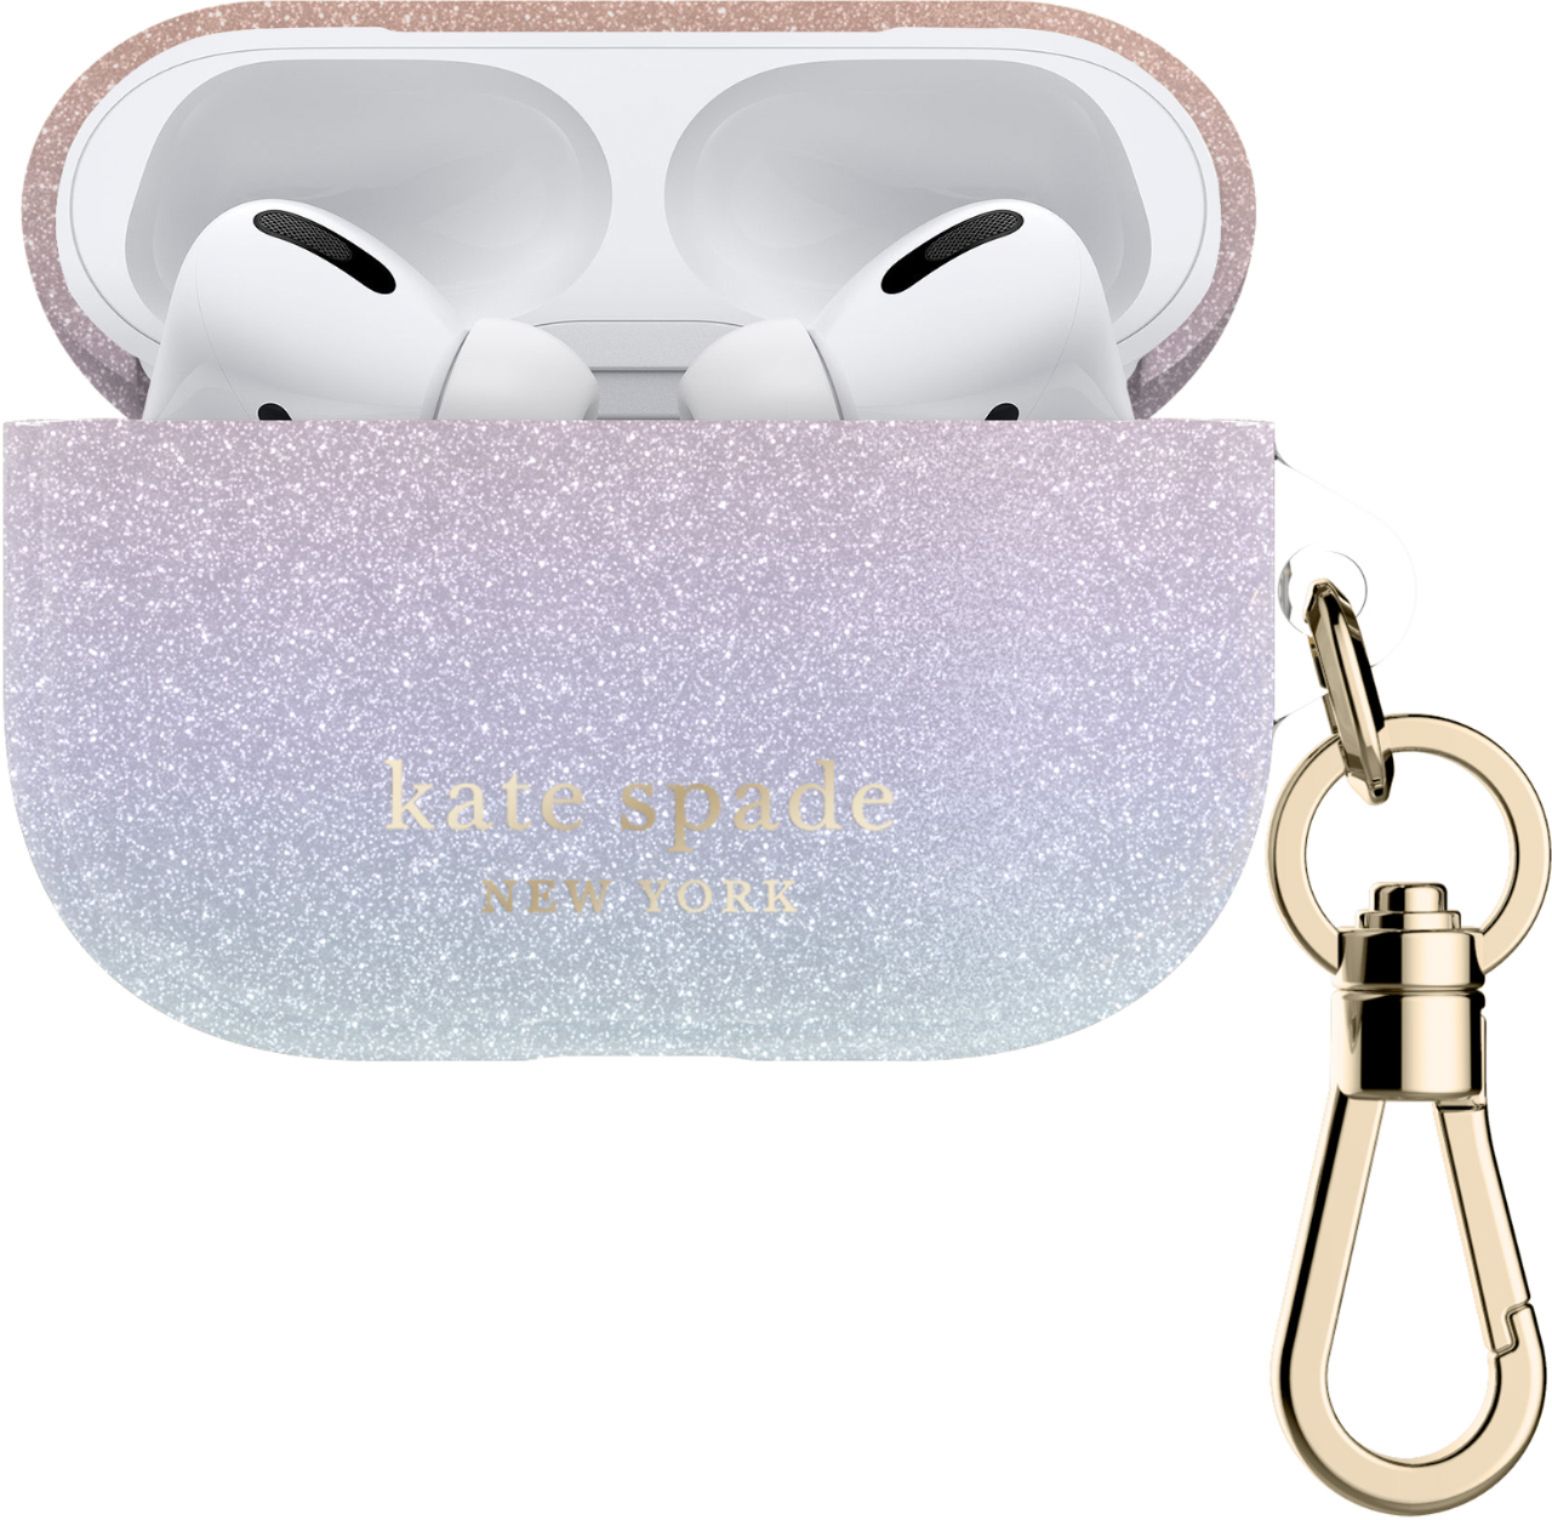 Questions and Answers: kate spade new york Kate Spade AirPods Pro Case ...